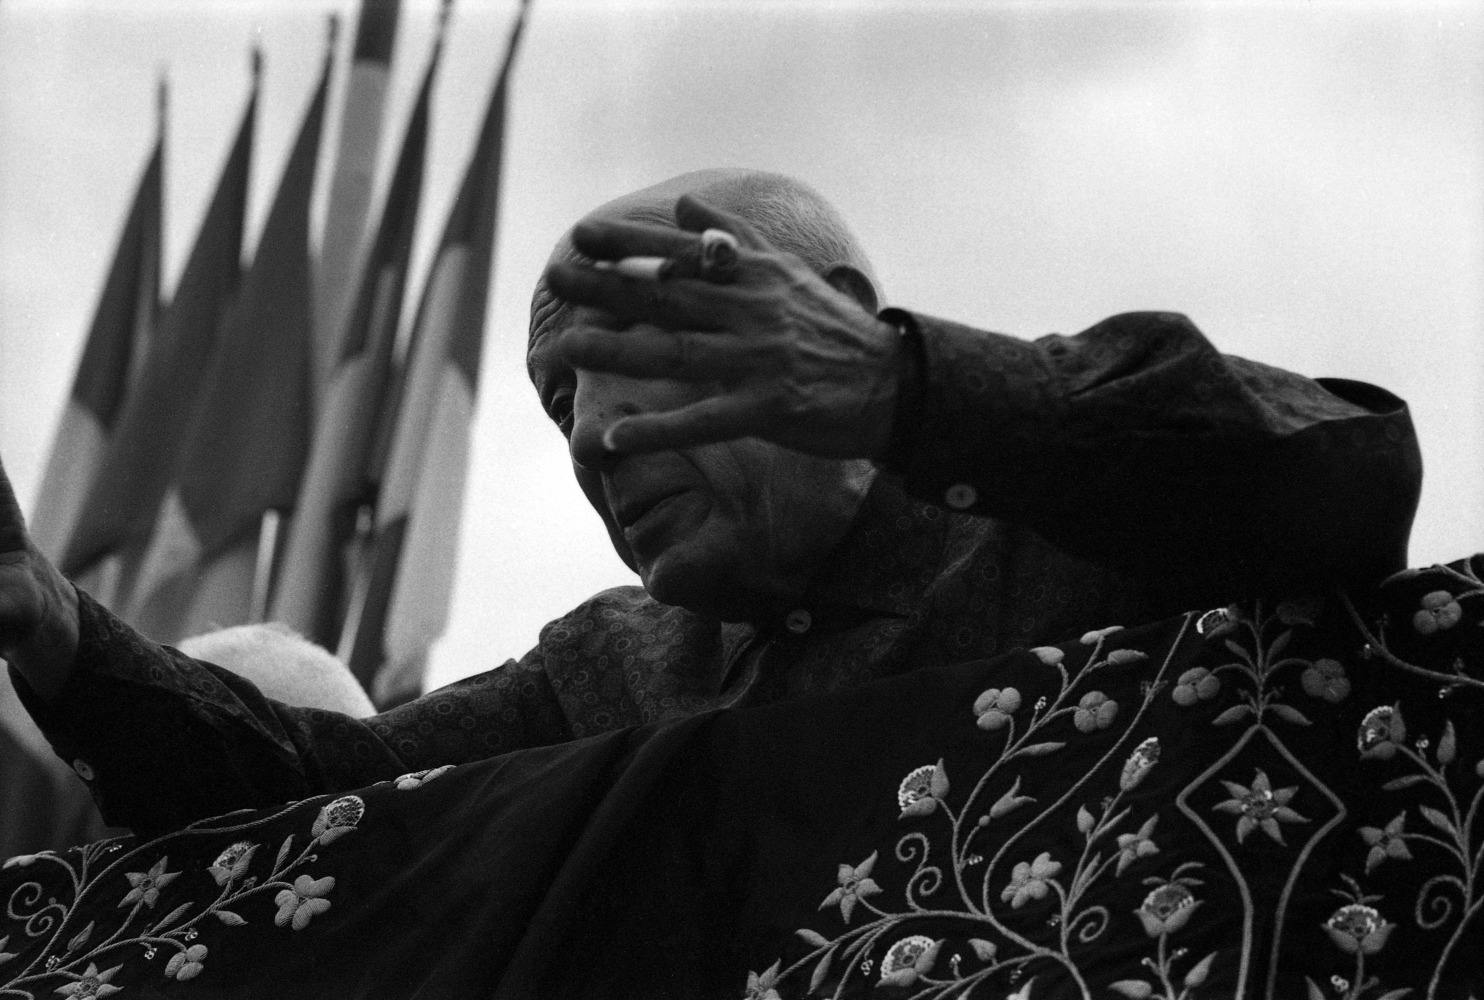 Picasso, Fr&amp;eacute;jus, 1962

silver gelatin print, edition 1/30

9.45 x 11.81 inches; 24 x 30 centimeters

LSFA# 11177